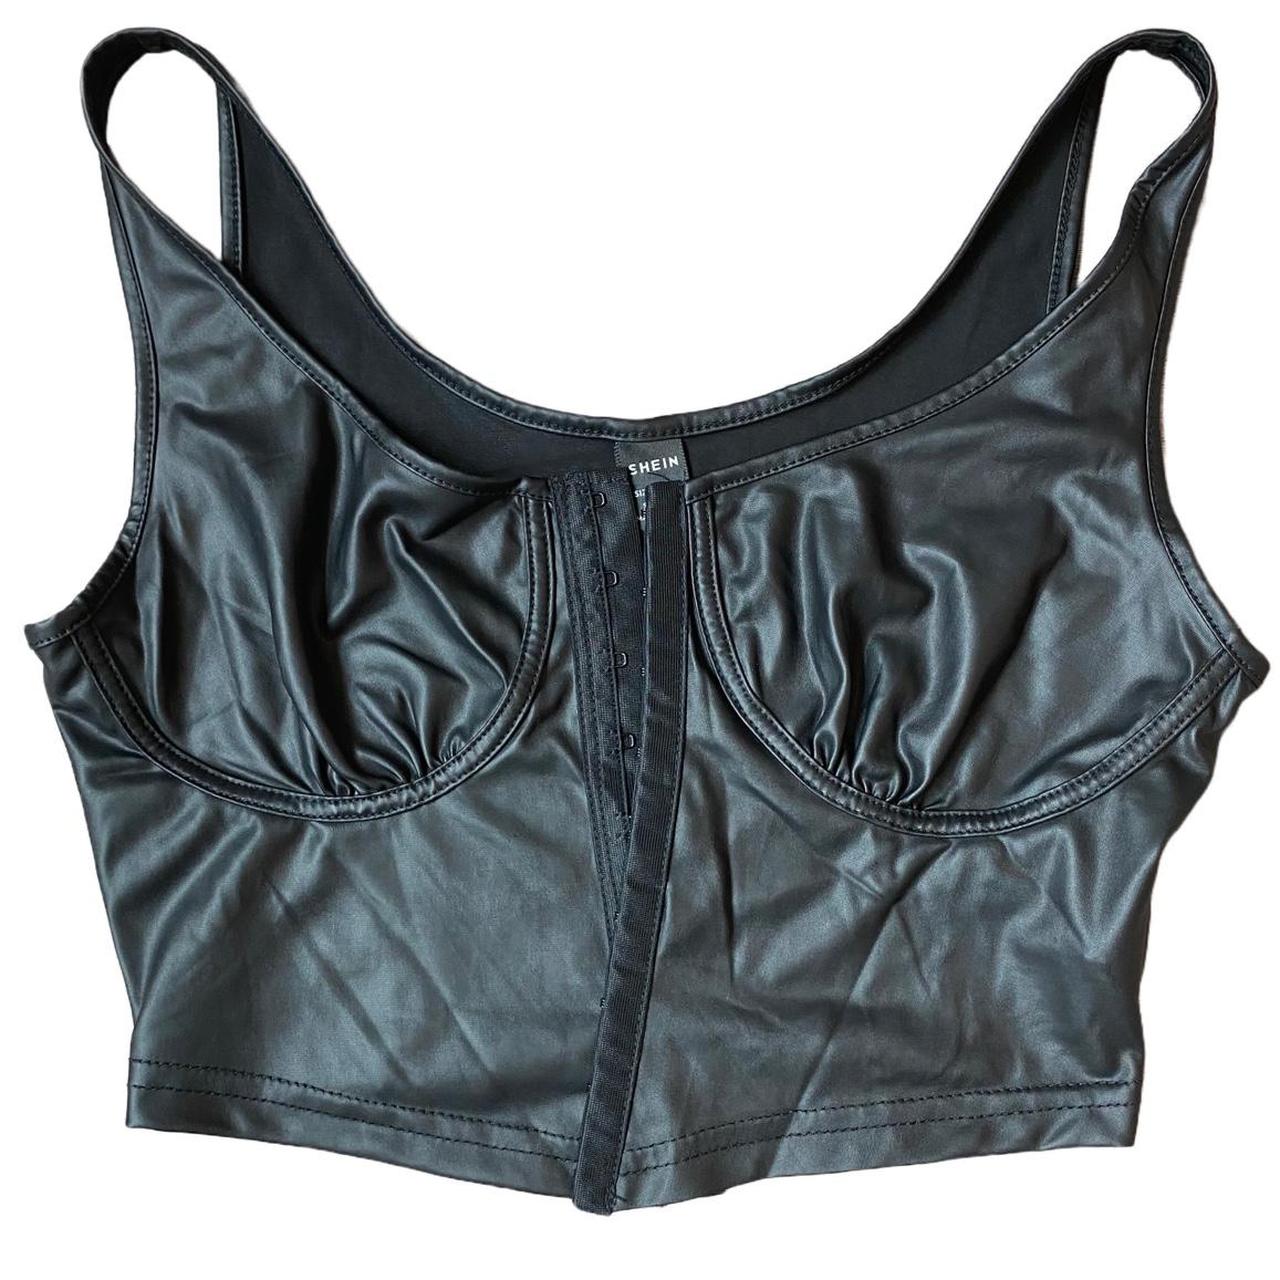 Shein corset tank top. This is amazing quality and